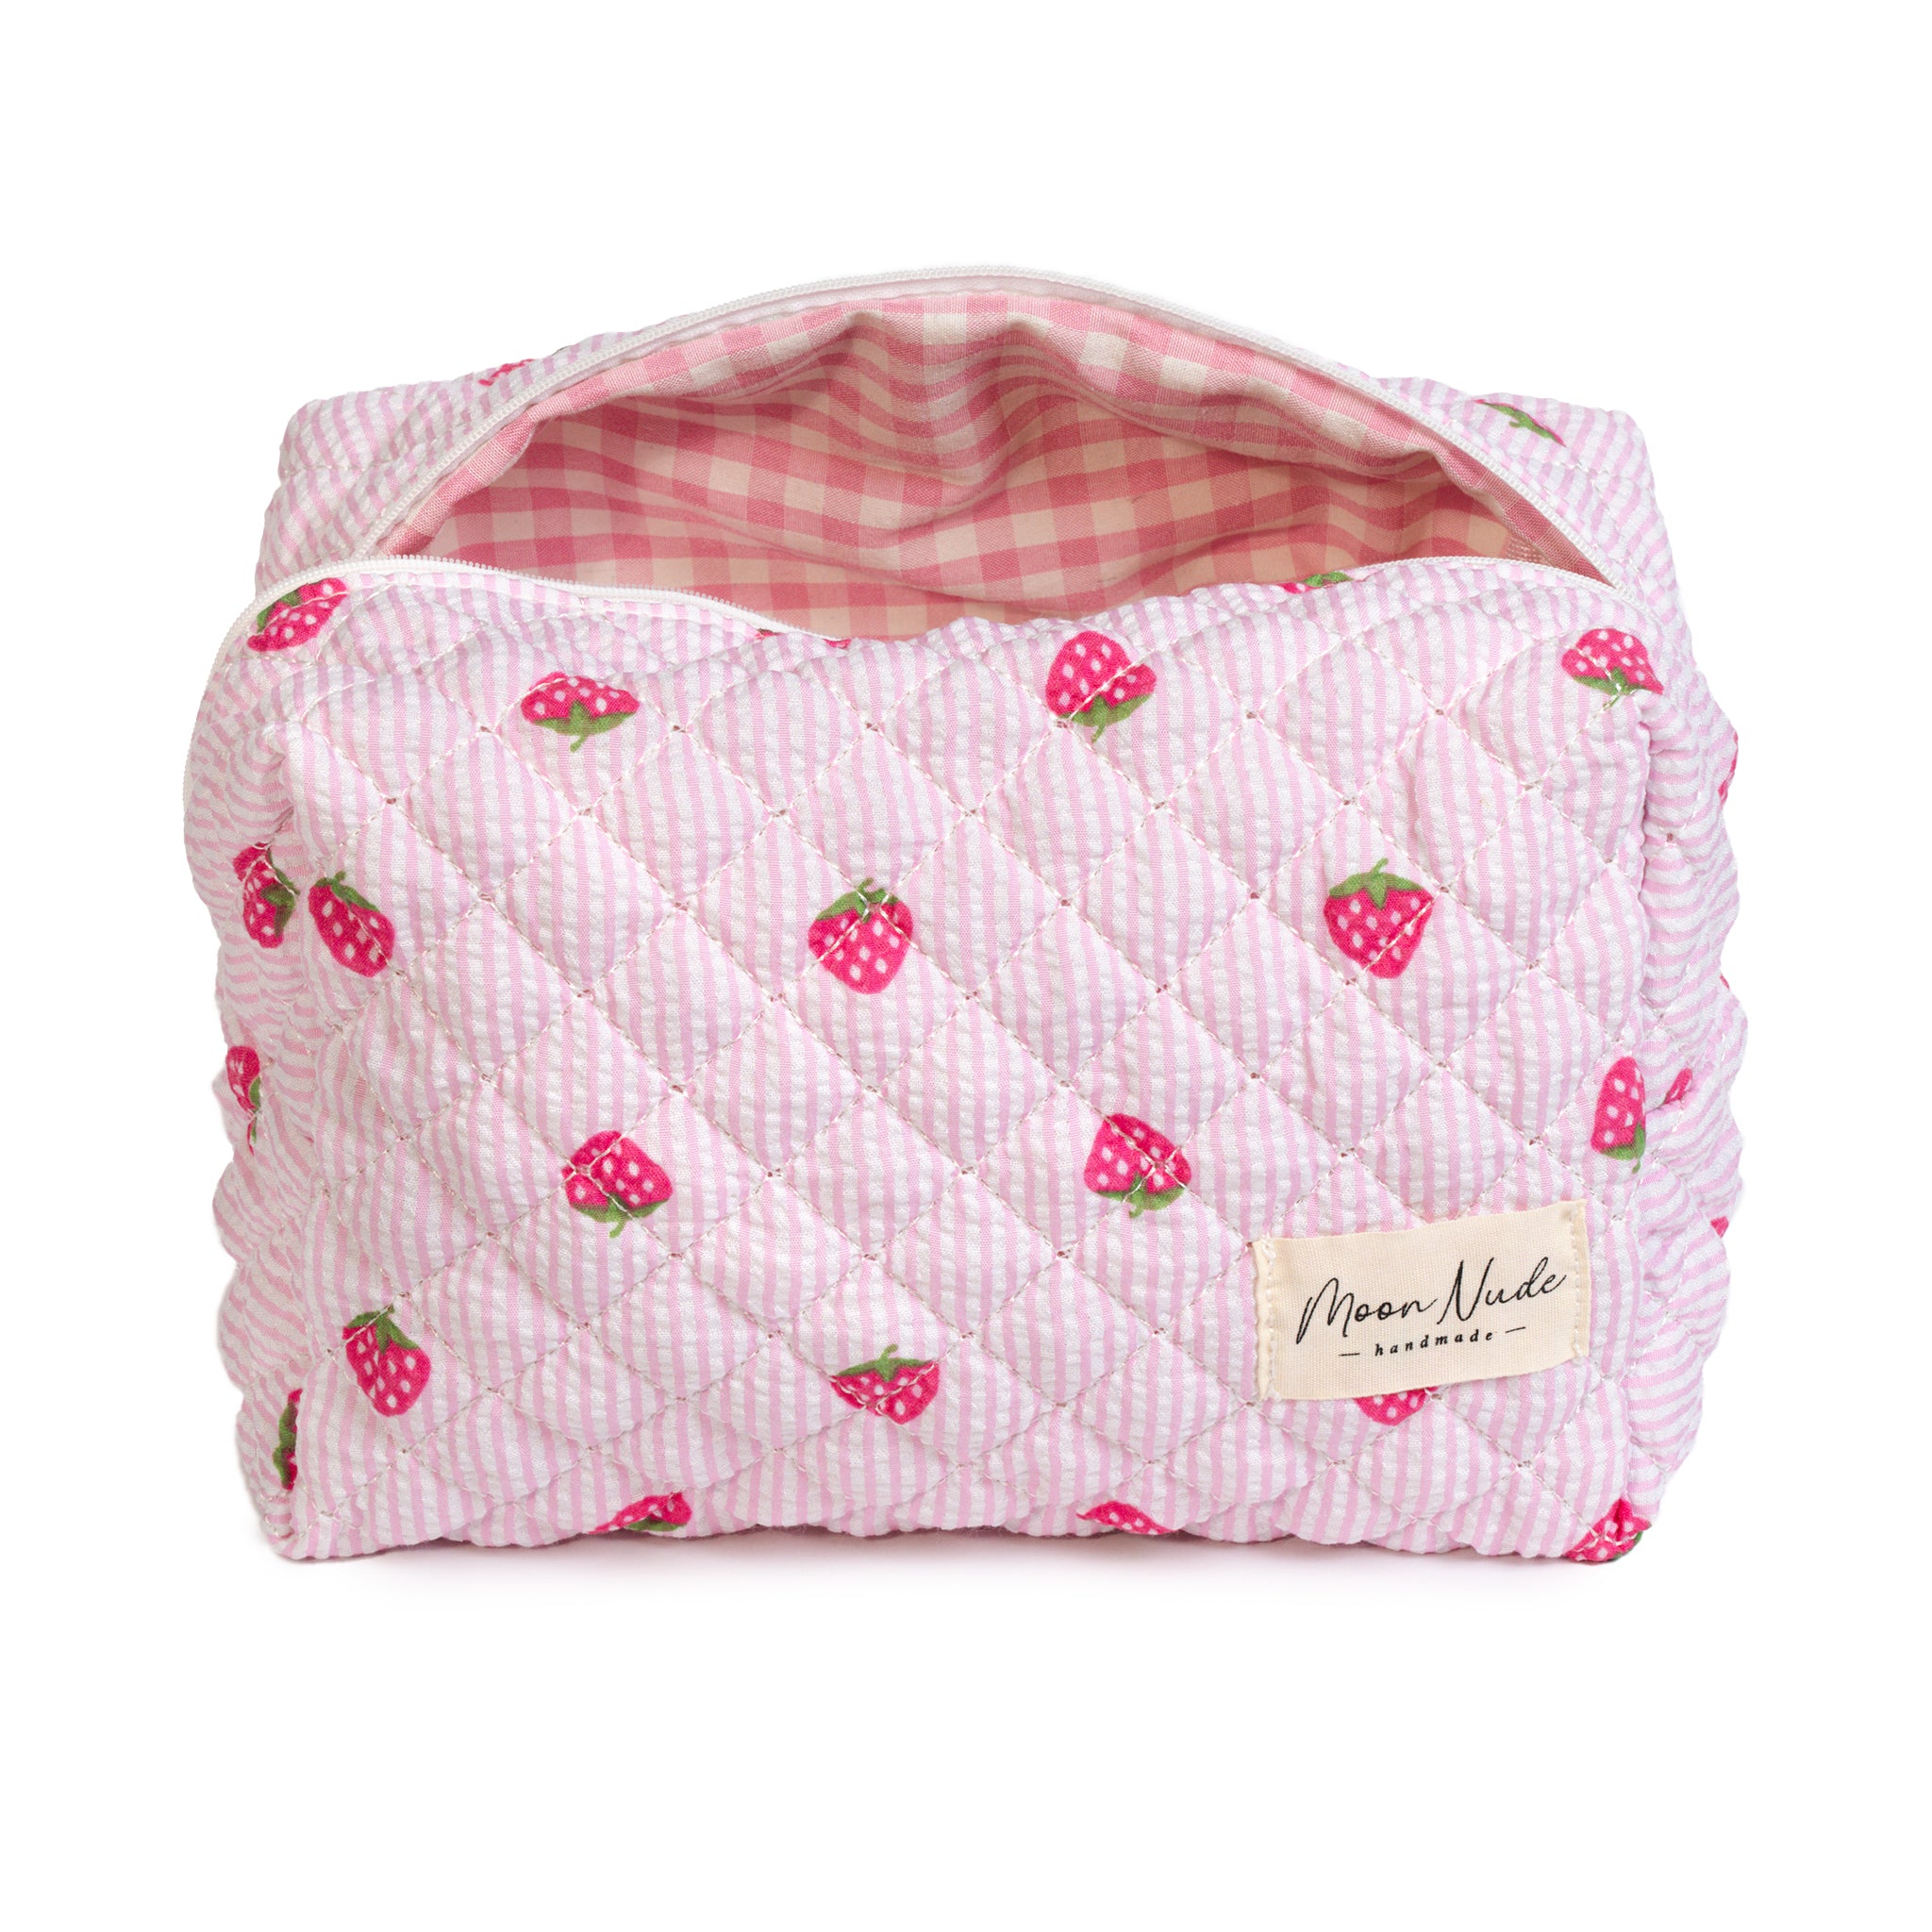 Strawberry - Large Bag - Moon Nude